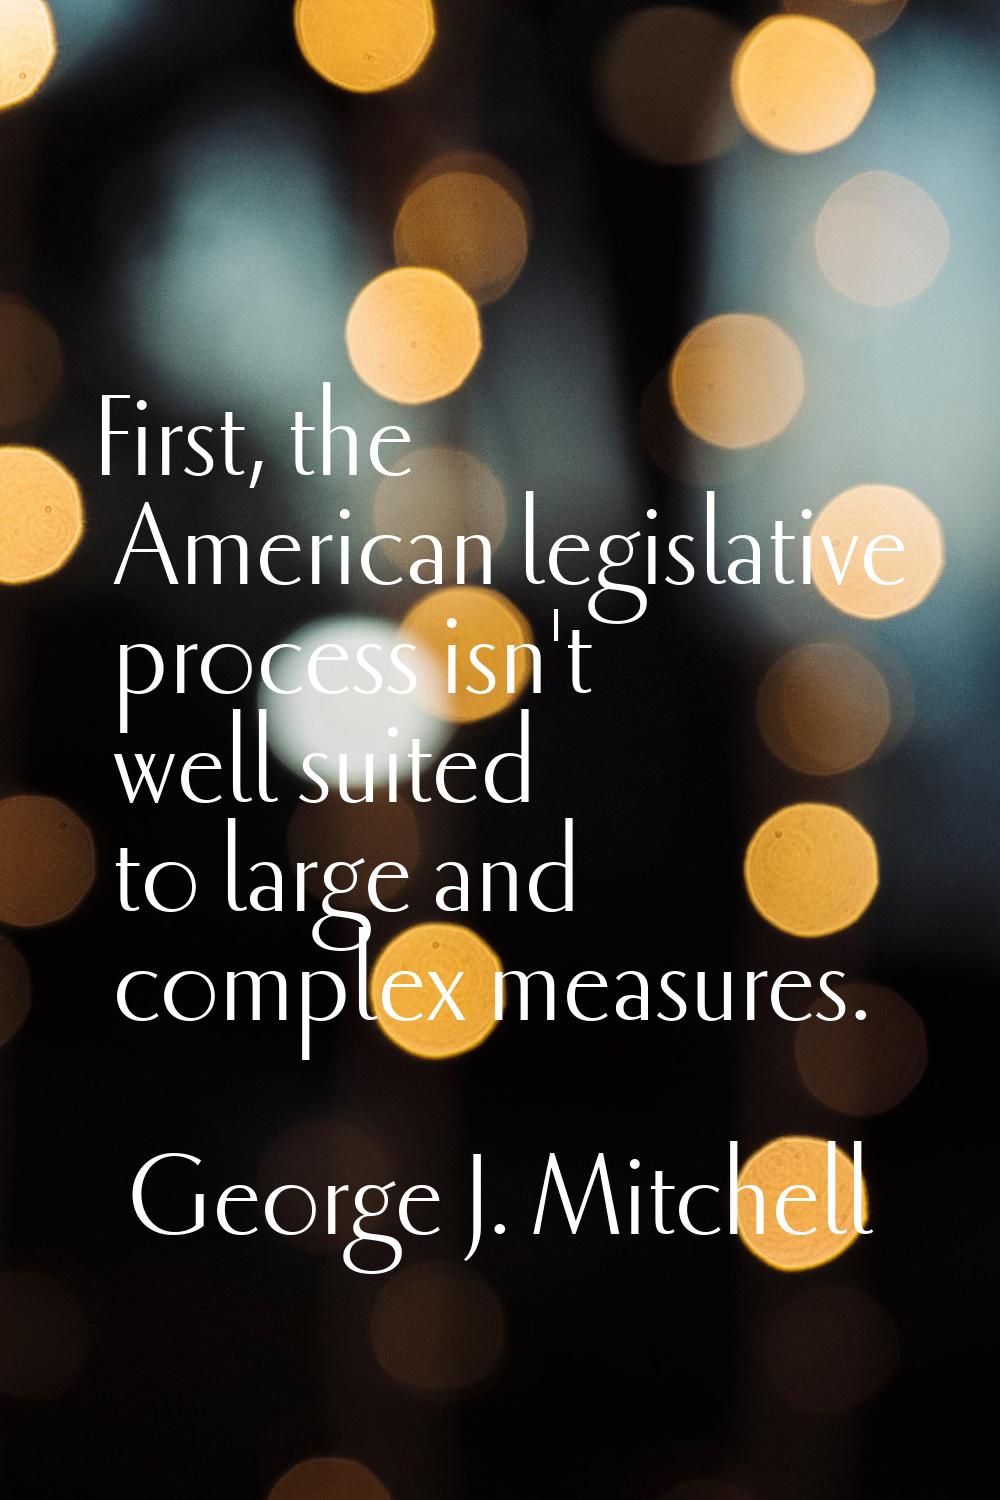 First, the American legislative process isn't well suited to large and complex measures.